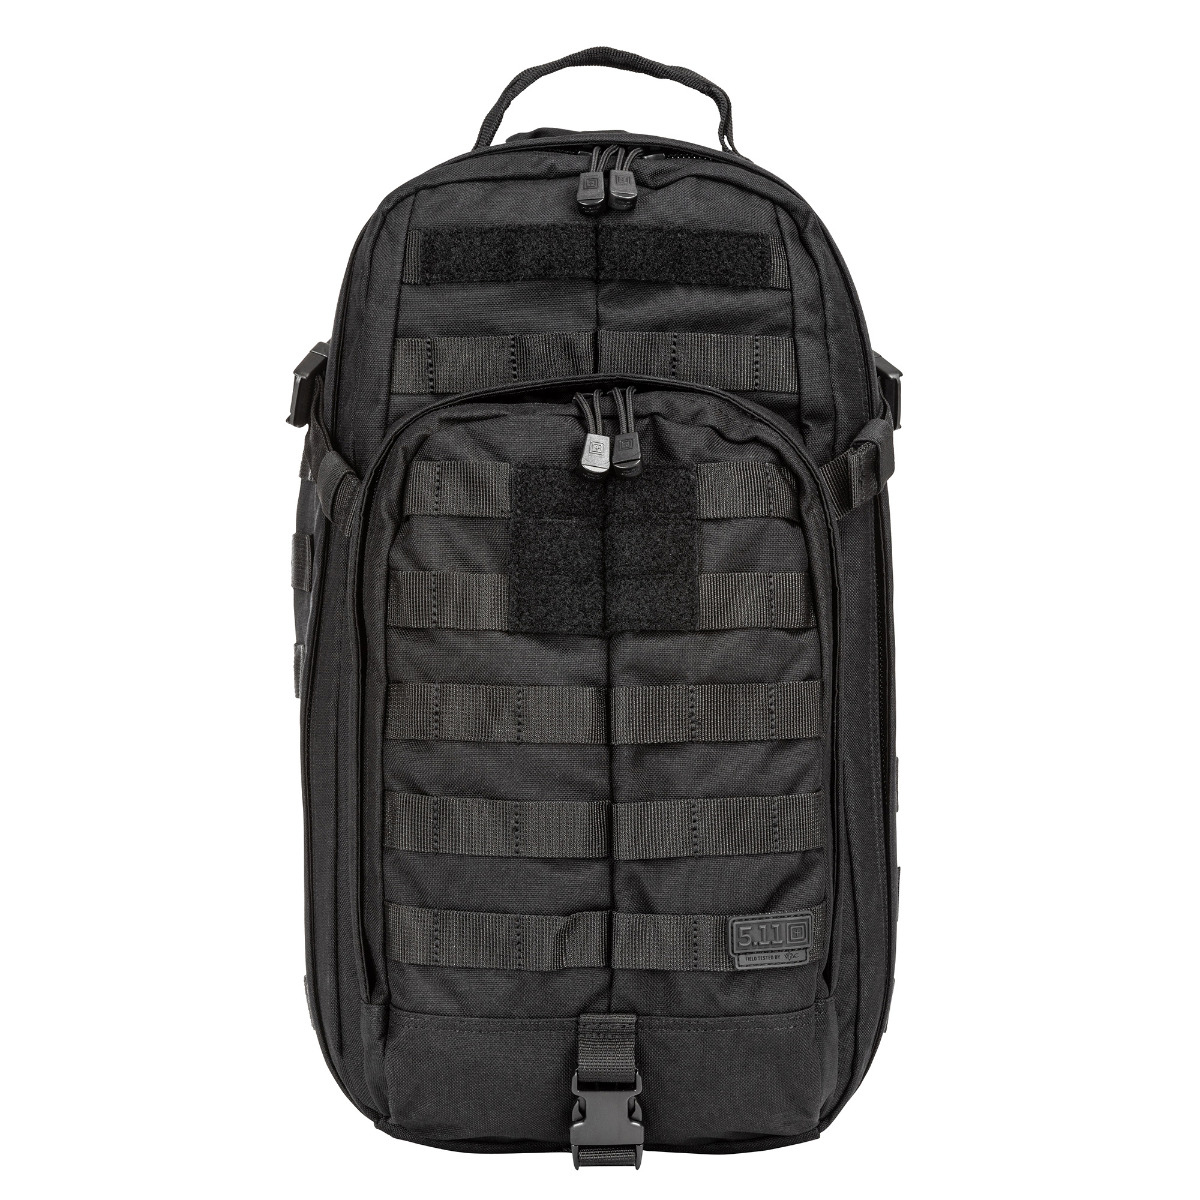 5.11 TACTICAL RUSH MOAB™ 10 PACK 56964 / BLACK 019 * NEW * Free Shipping!-img-3